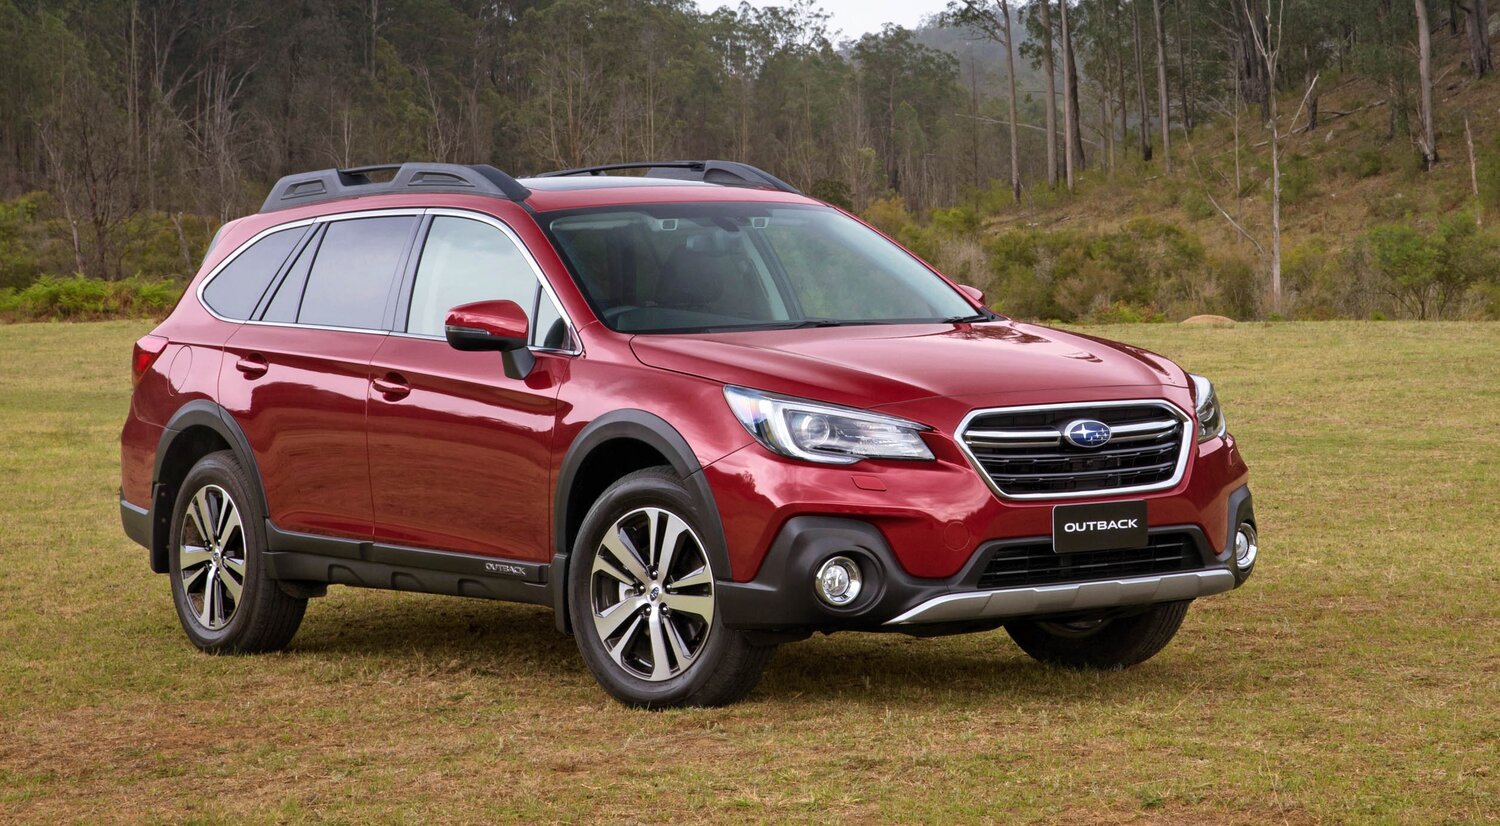 2021 Subaru Outback update — Auto Expert by John Cadogan - save thousands on your next new car!